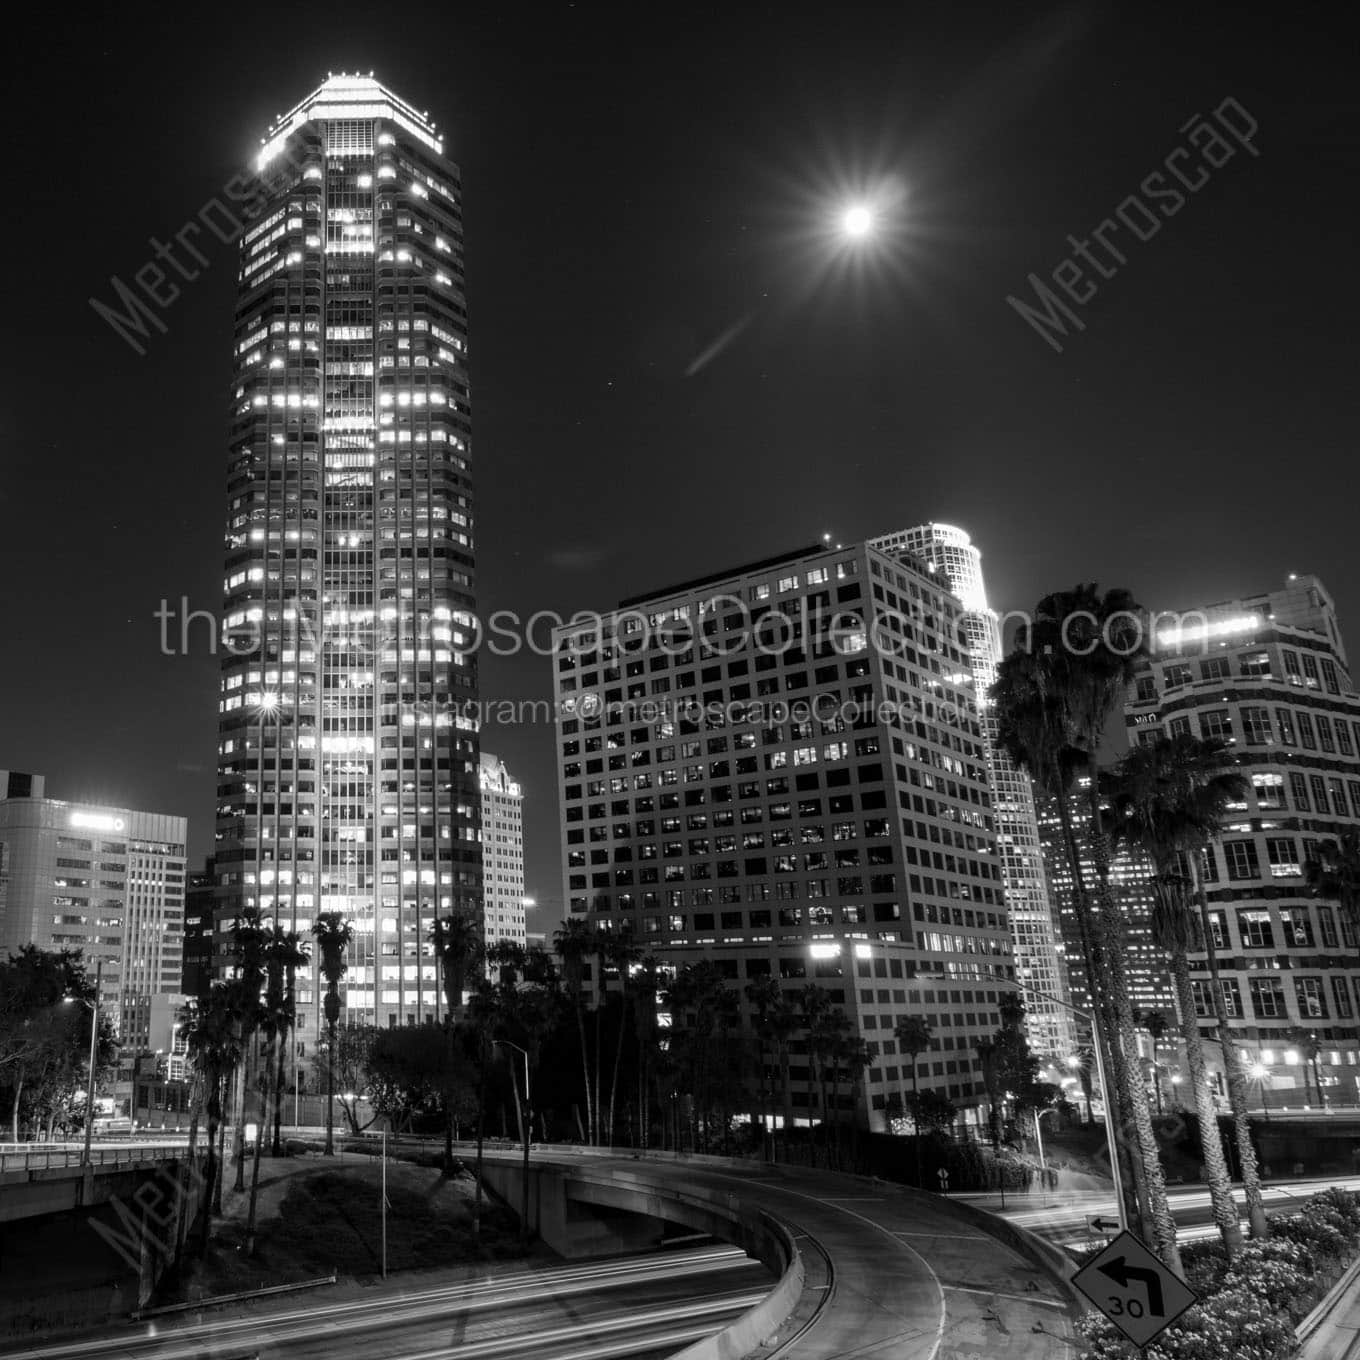 pwc building from fifth street exit ramp Black & White Office Art